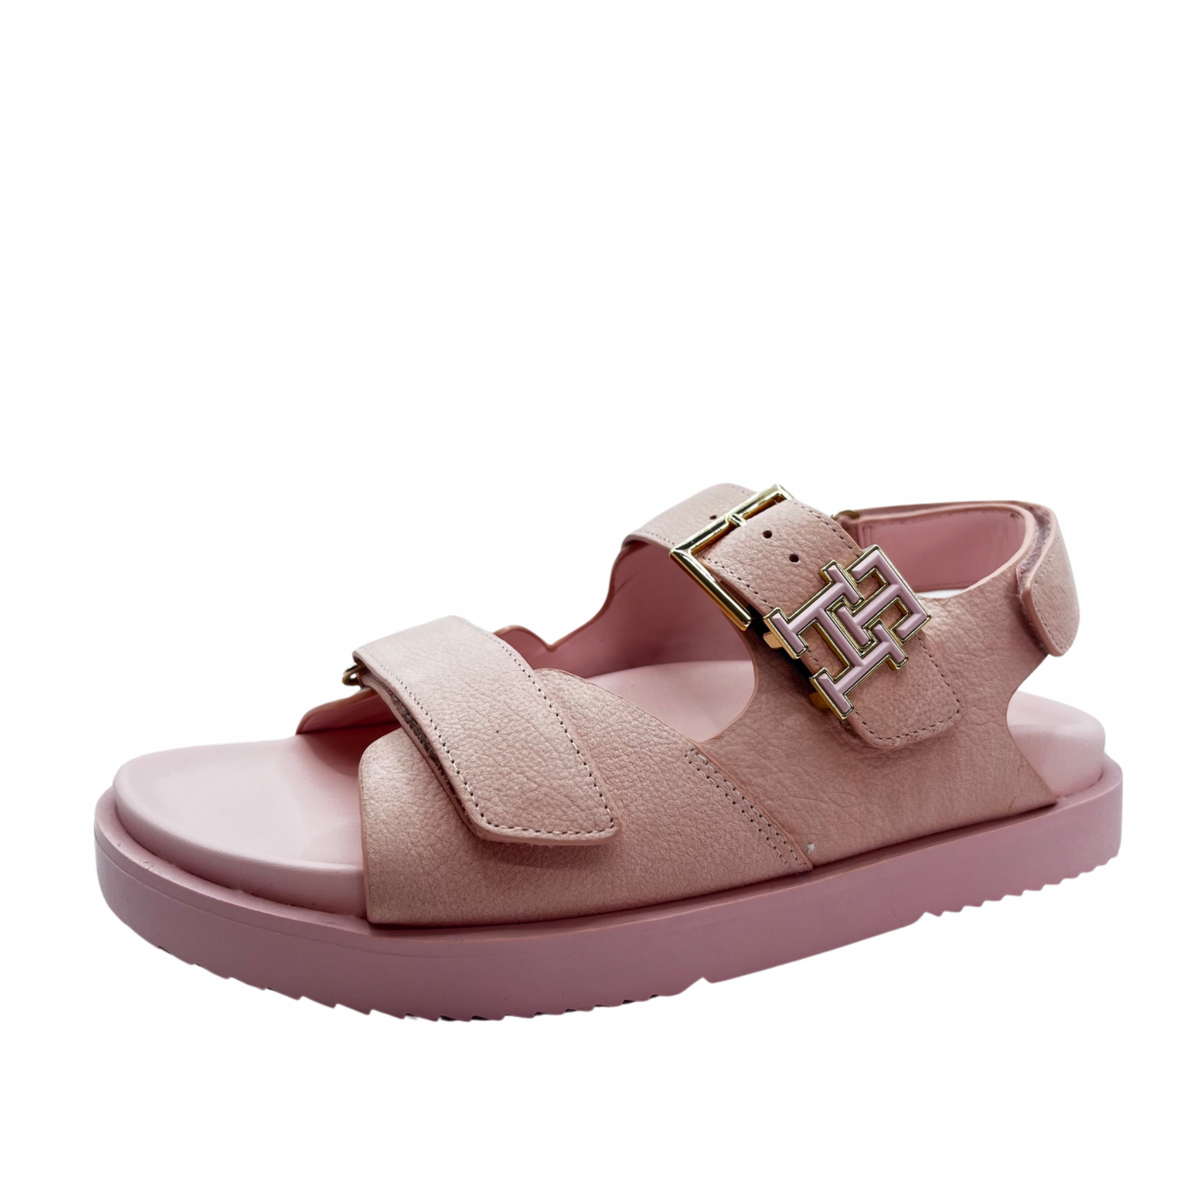 Tommy Hilfiger Pink Sandals with Velcro Strap